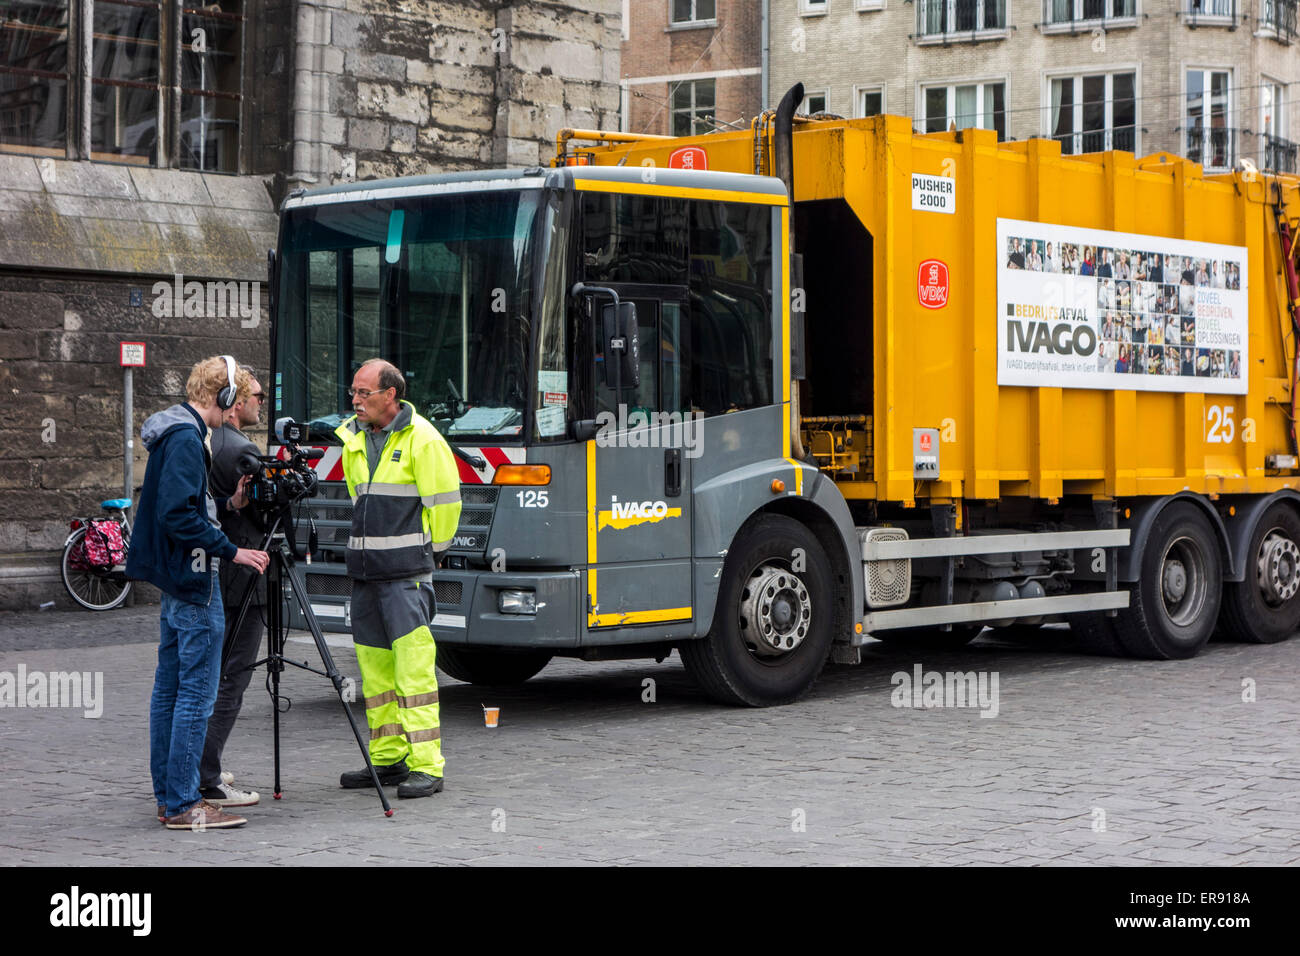 Refuse collector of waste processing firm IVAGO giving interview to camera crew about strike in the city Ghent, Belgium Stock Photo